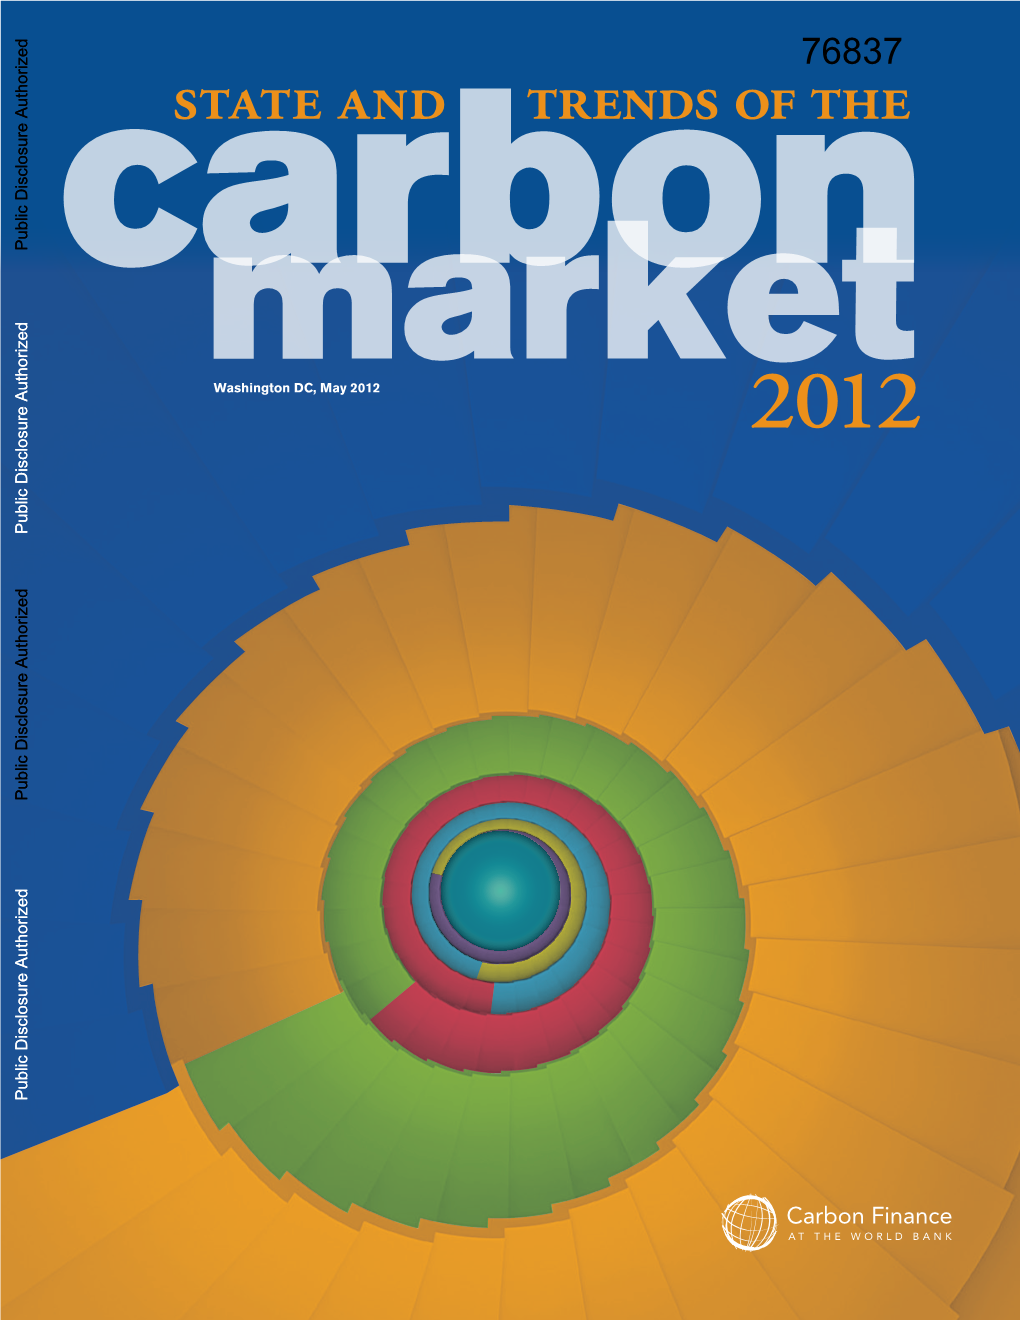 State and Trends of the Carbon Market 2012 Received Financial Support from the CF-Assist Program, Managed by the World Bank Institute (WBI)